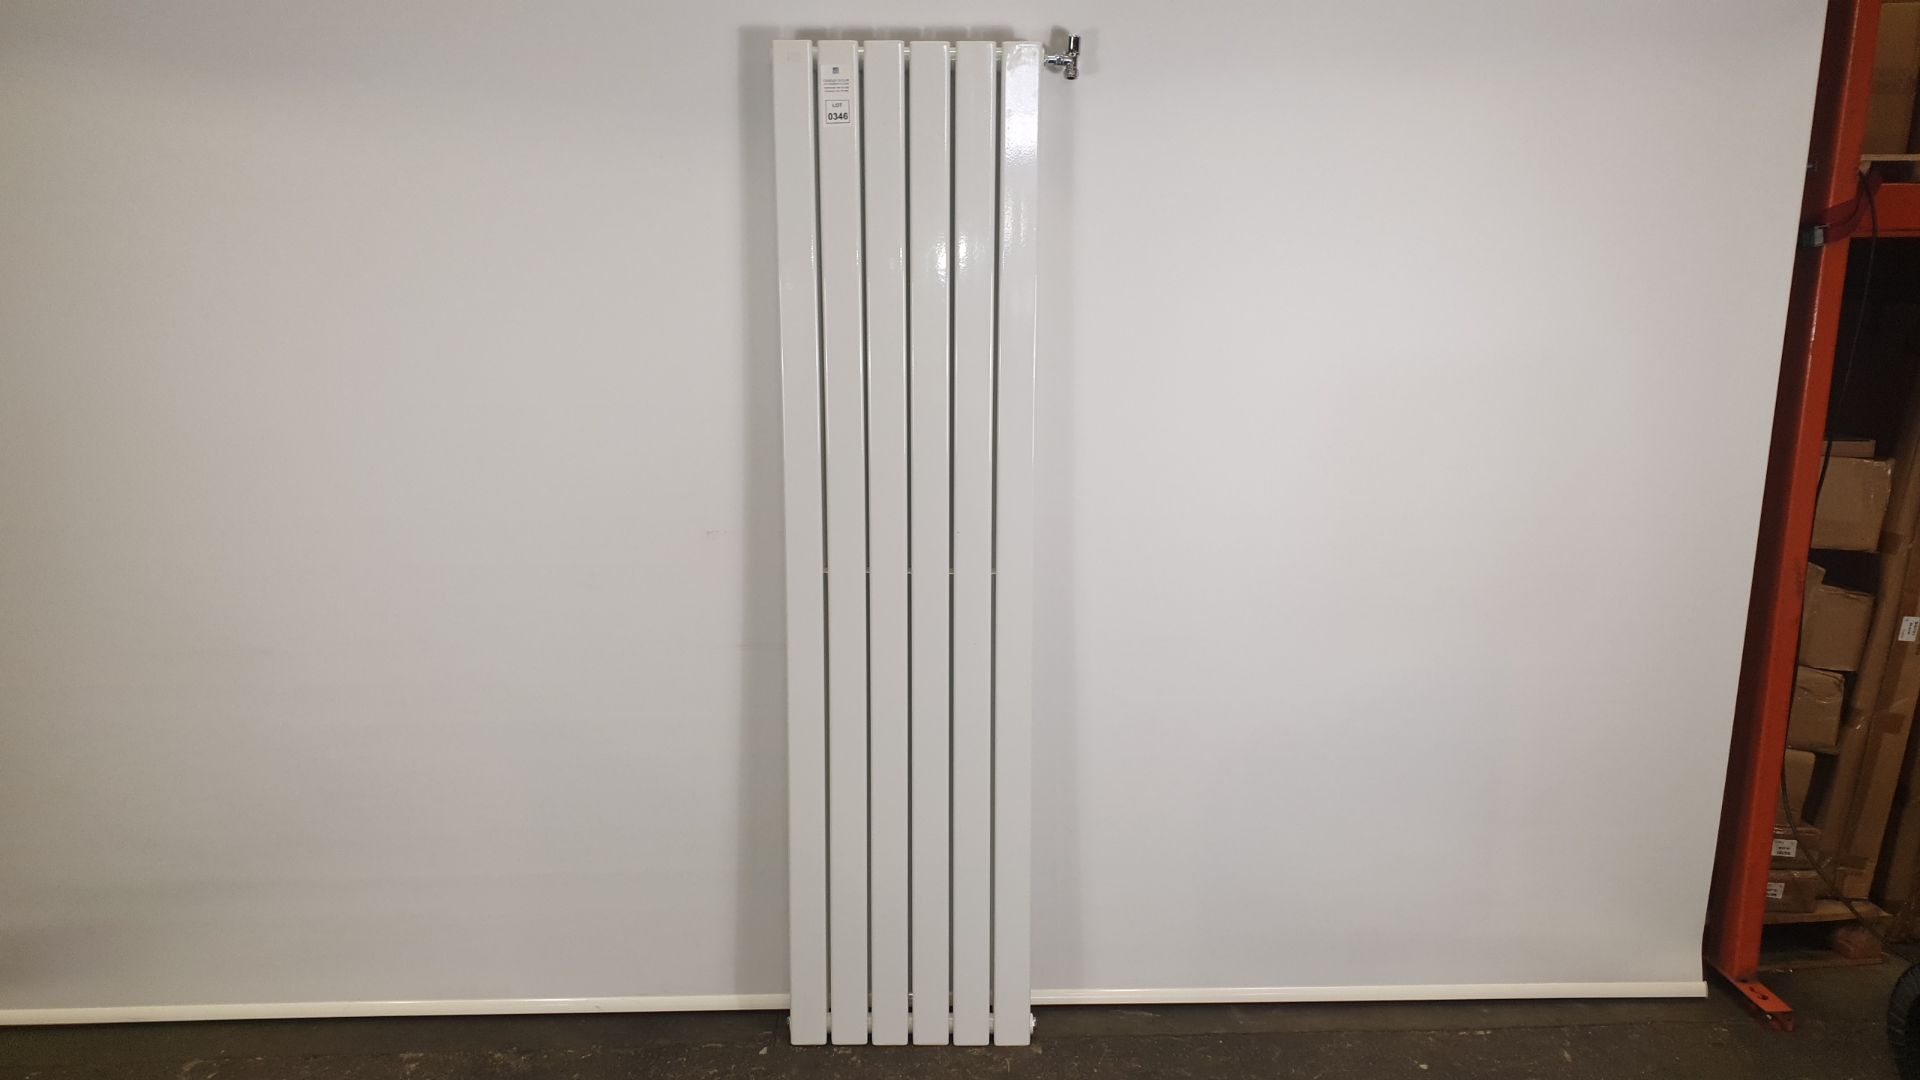 WHITE VERTICAL 6 PANEL RADIATOR 180 CM TALL BY 45 CM WIDE